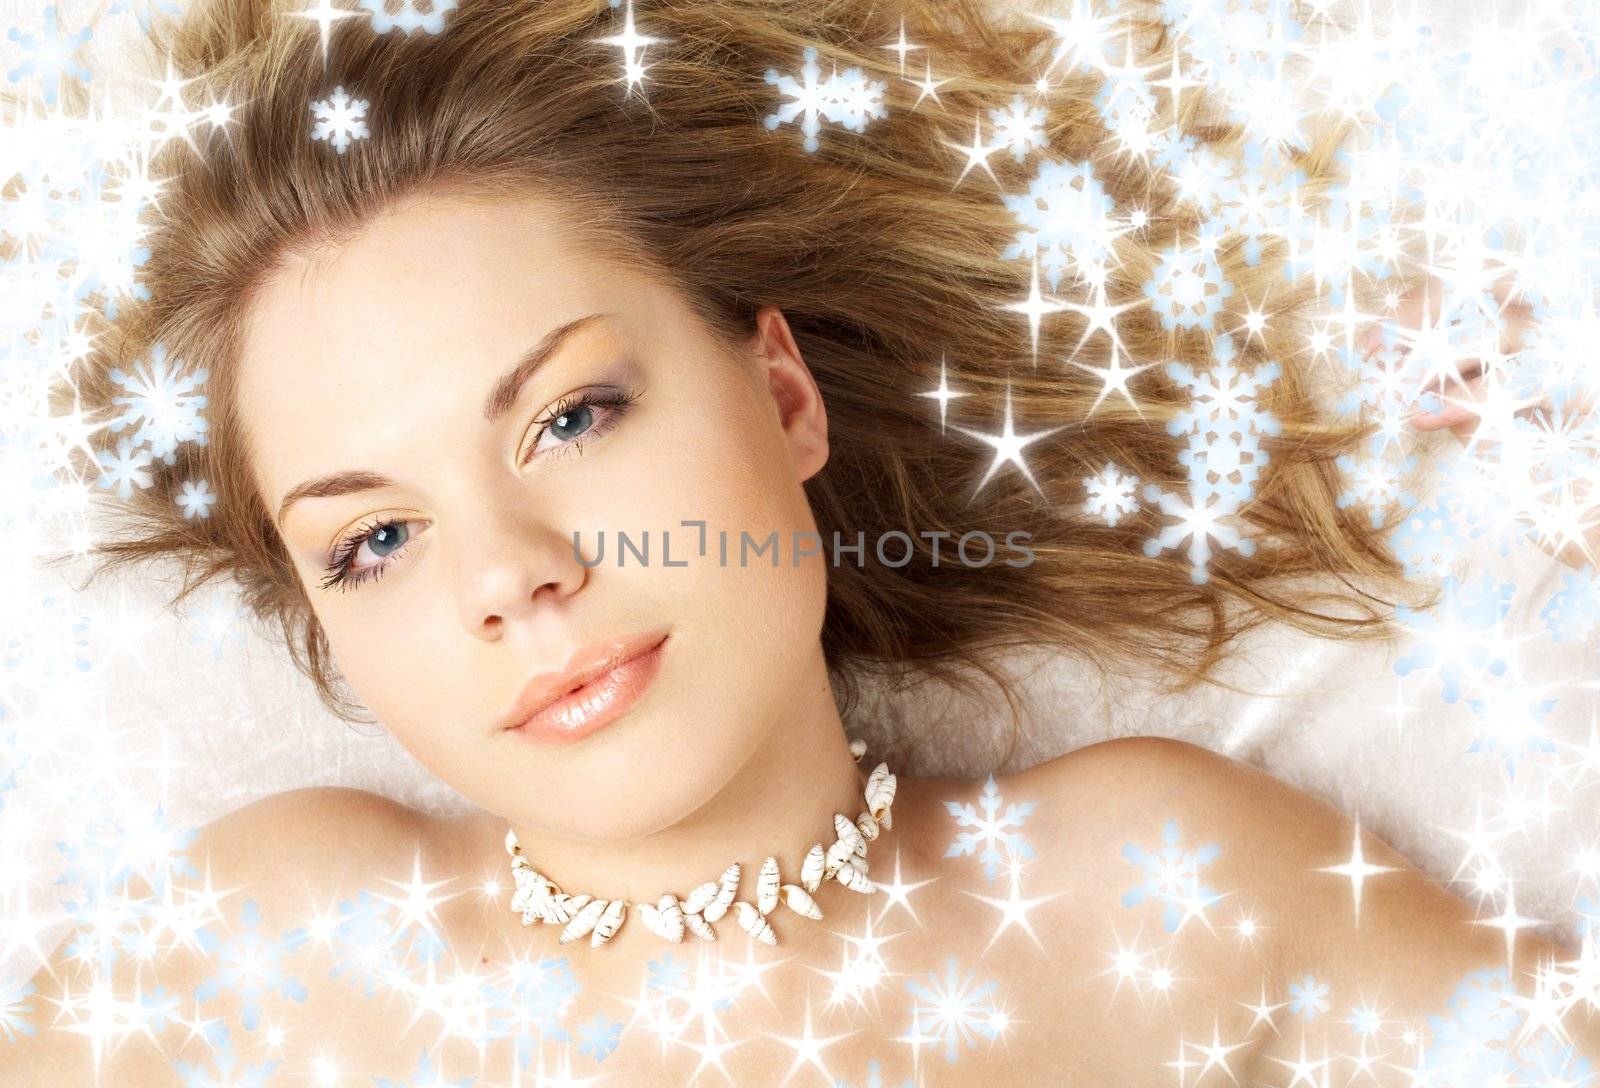 lovely topless girl with shell beads and snowflakes